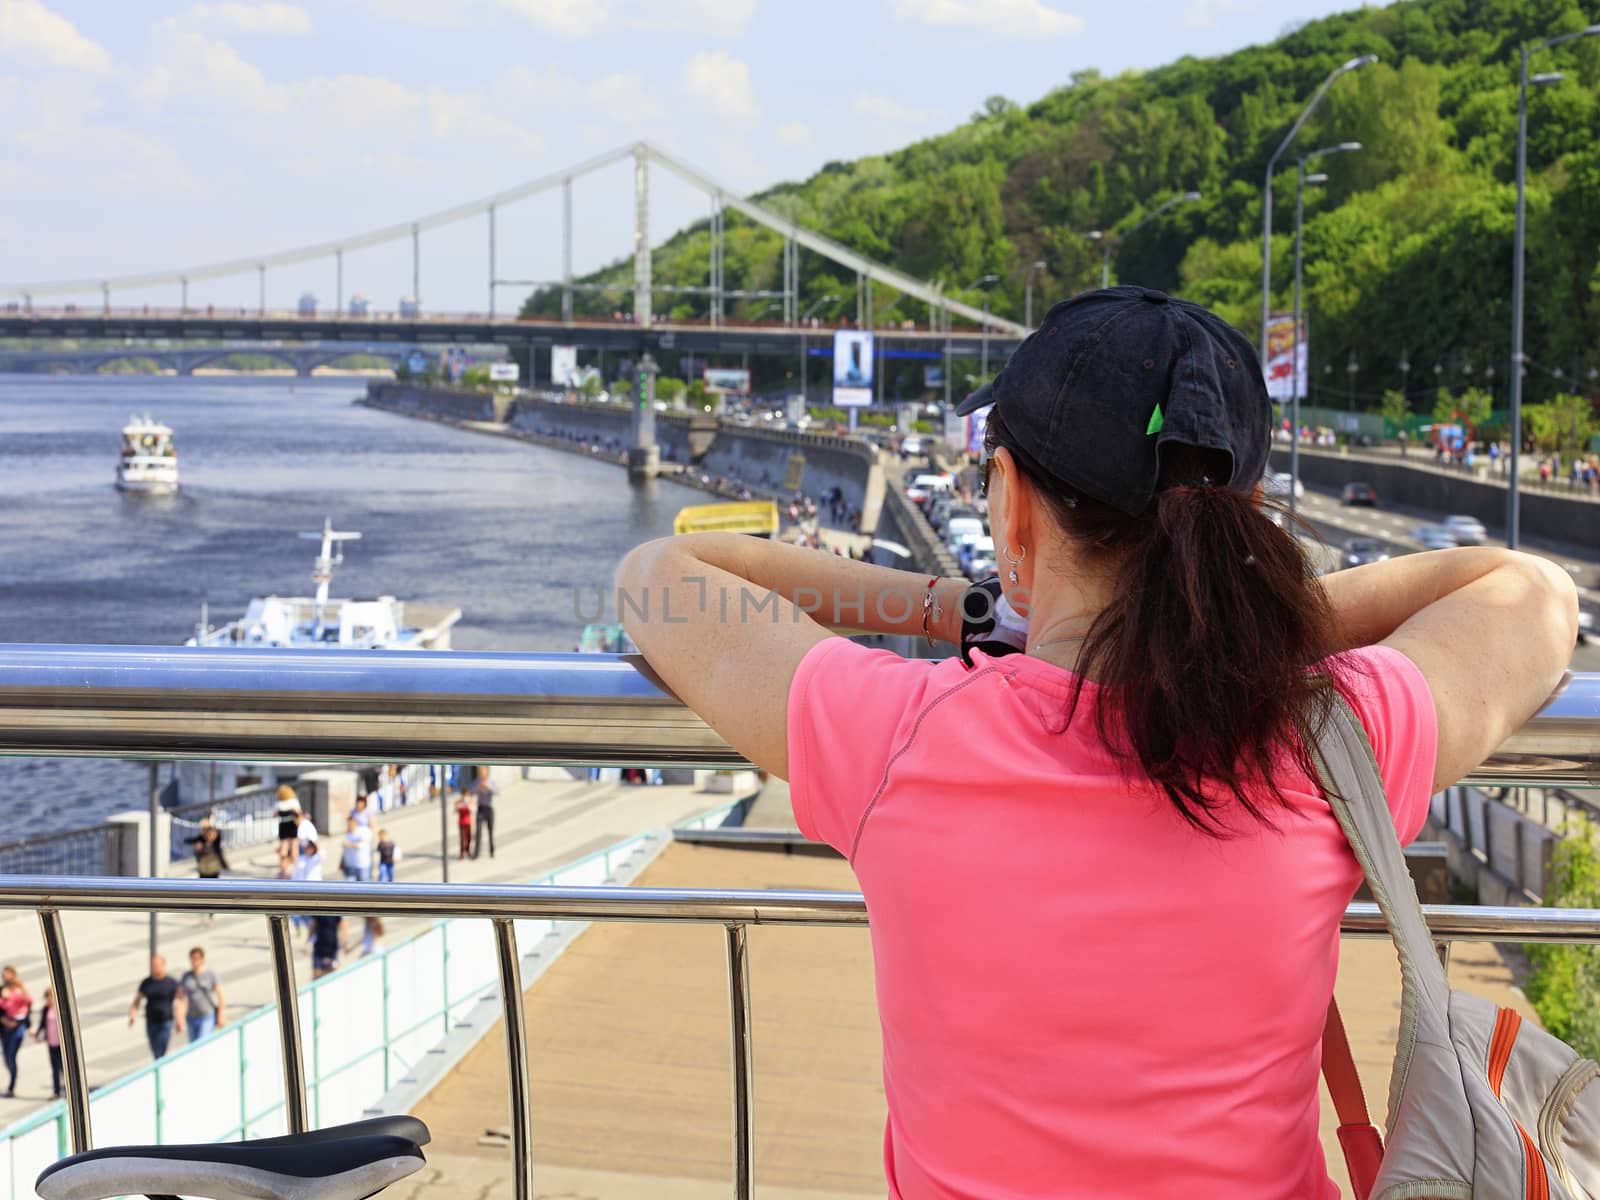 A young woman looks at the embankment of the Dnieper River in Kiev, Ukraine. A lady traveler in a bright pink T-shirt stands on the observation deck and looks towards the bridge.